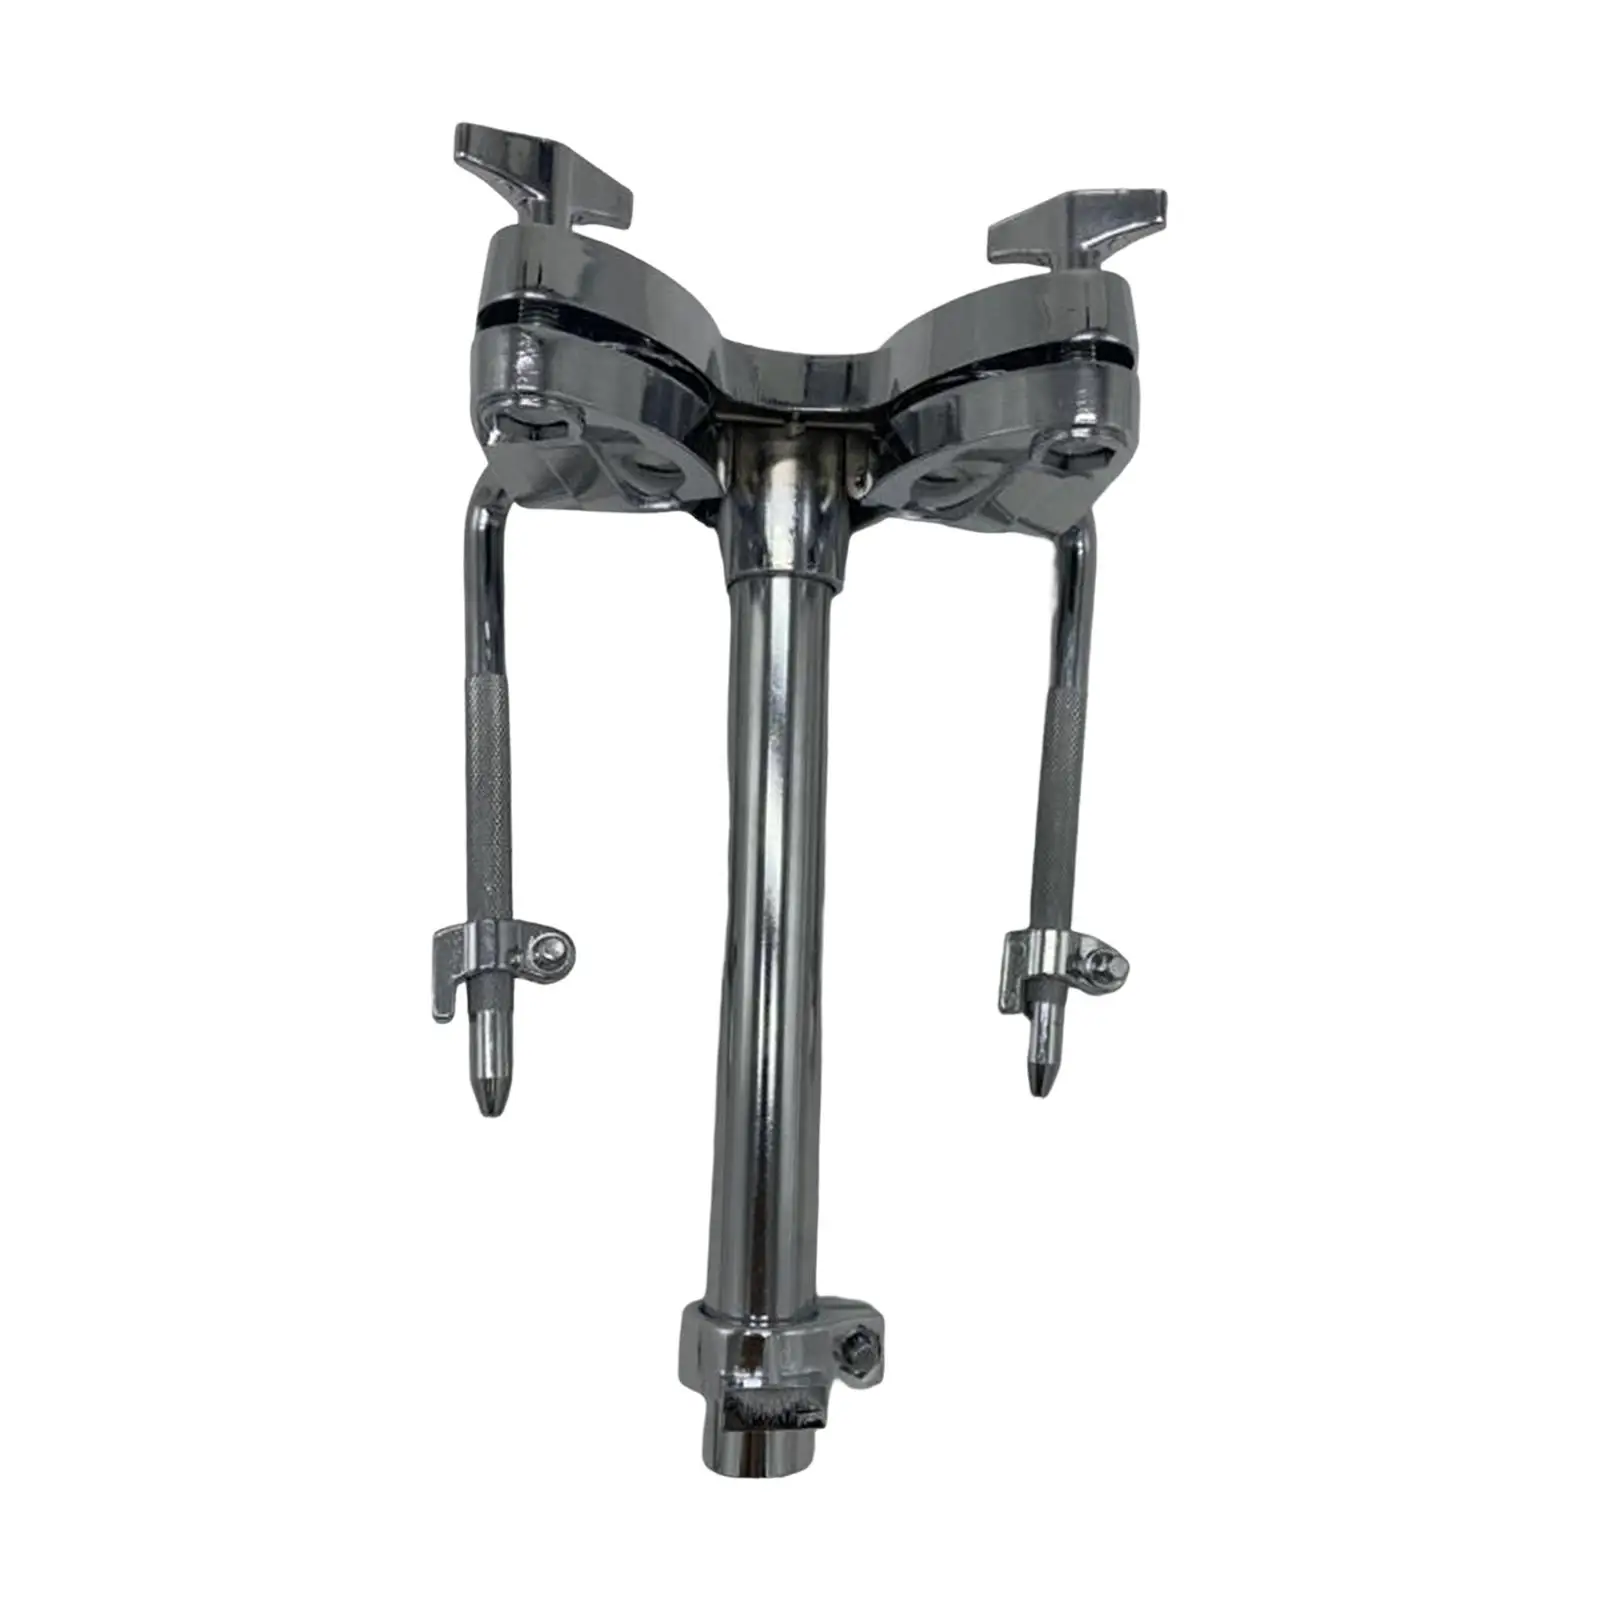 Double Tom Holder Metal Drum Parts Instrument Replaces Parts Sturdy Tom Arm Mount Support for Bass Drum Set Tom Drum Spare Part